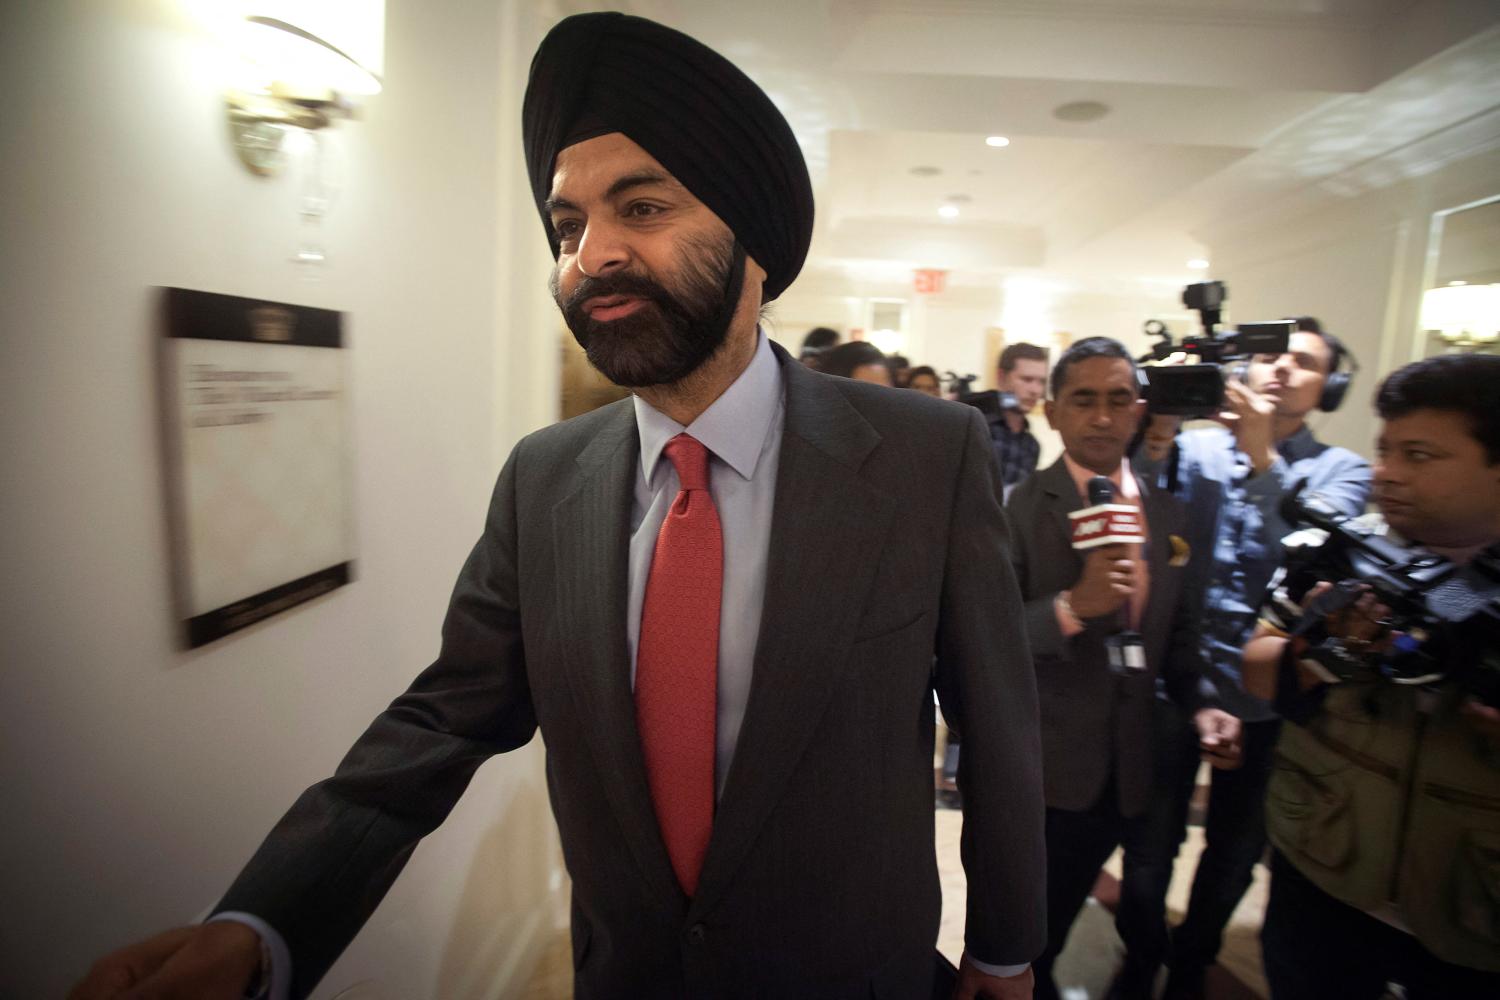 FILE PHOTO: President and CEO of Mastercard Ajay Banga leaves after meeting India's Prime Minister Narendra Modi at a breakfast in the Manhattan borough of New York September 29, 2014.    REUTERS/Carlo Allegri (UNITED STATES - Tags: POLITICS BUSINESS)/File Photo